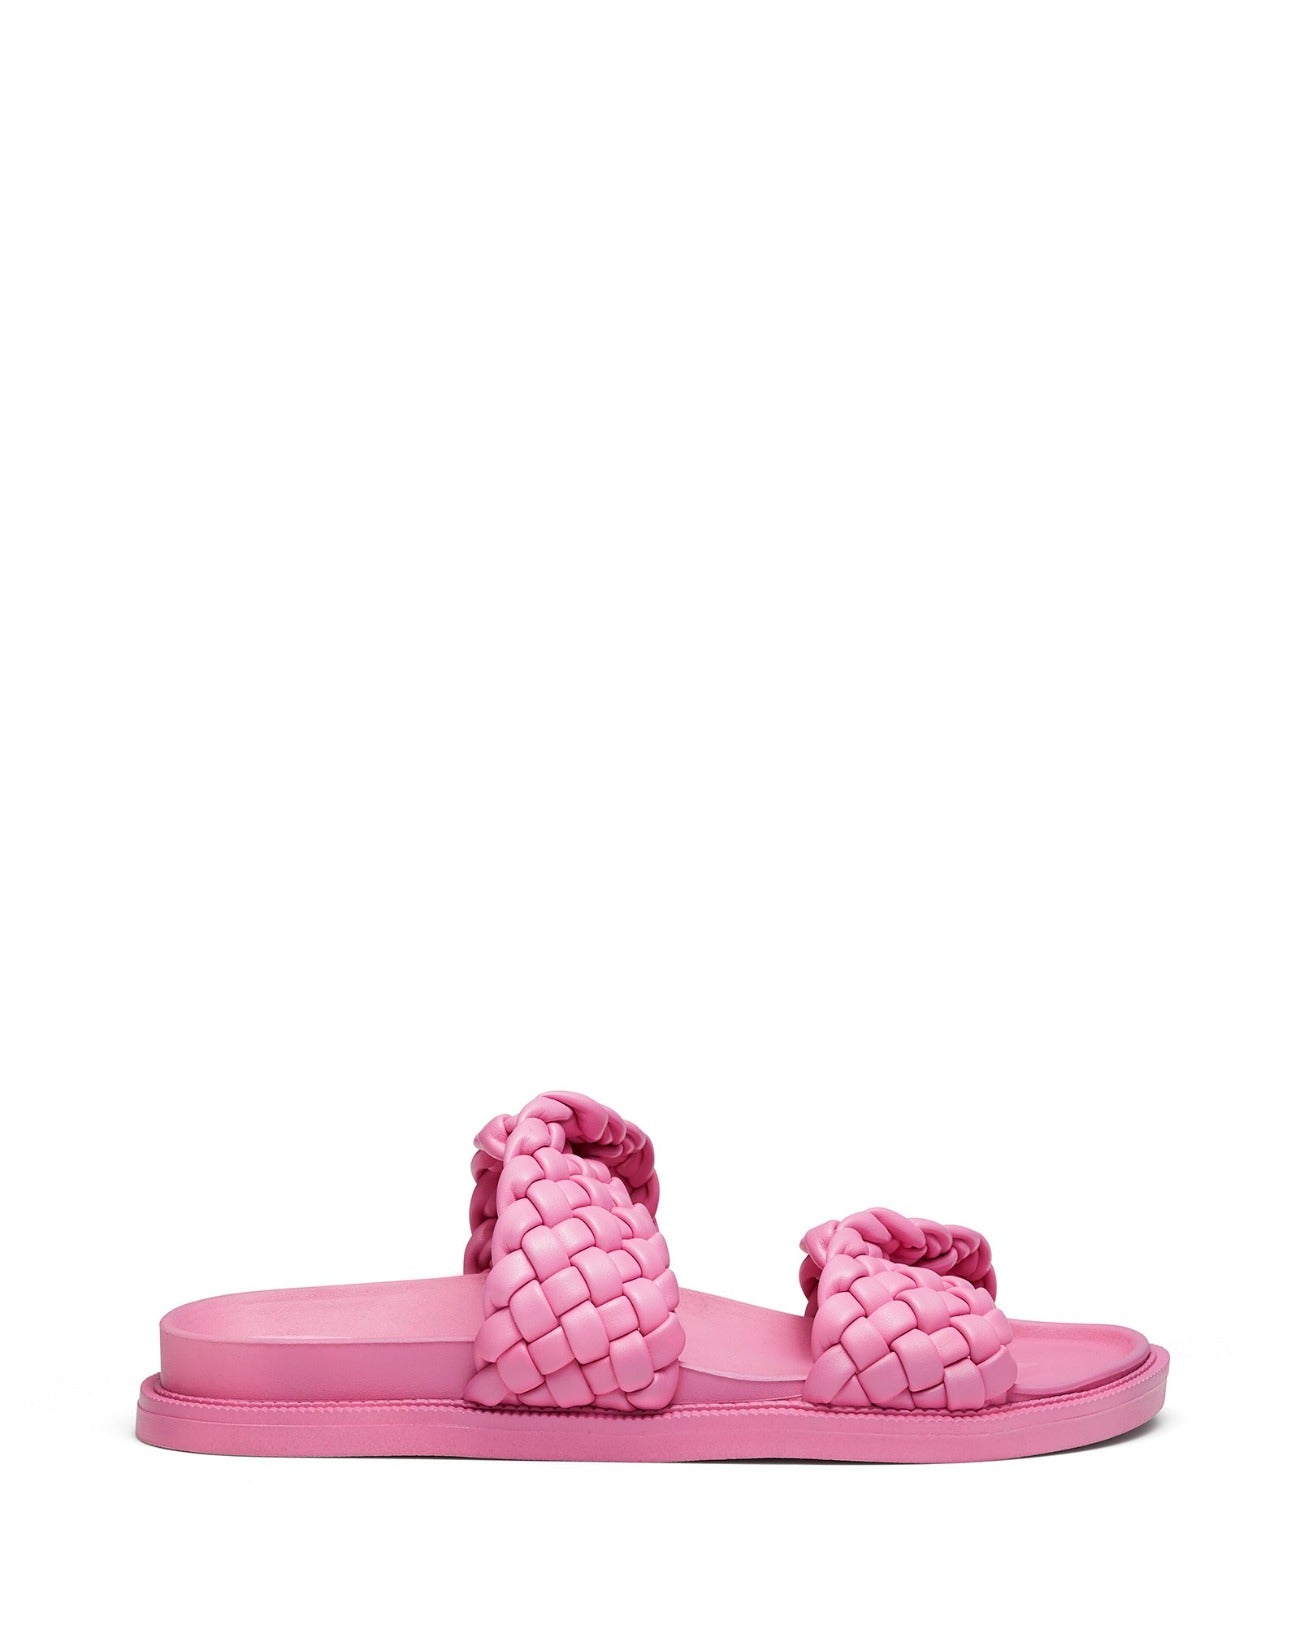 Therapy Shoes Evil Pink | Women's Sandals | Slides | Flats | Woven